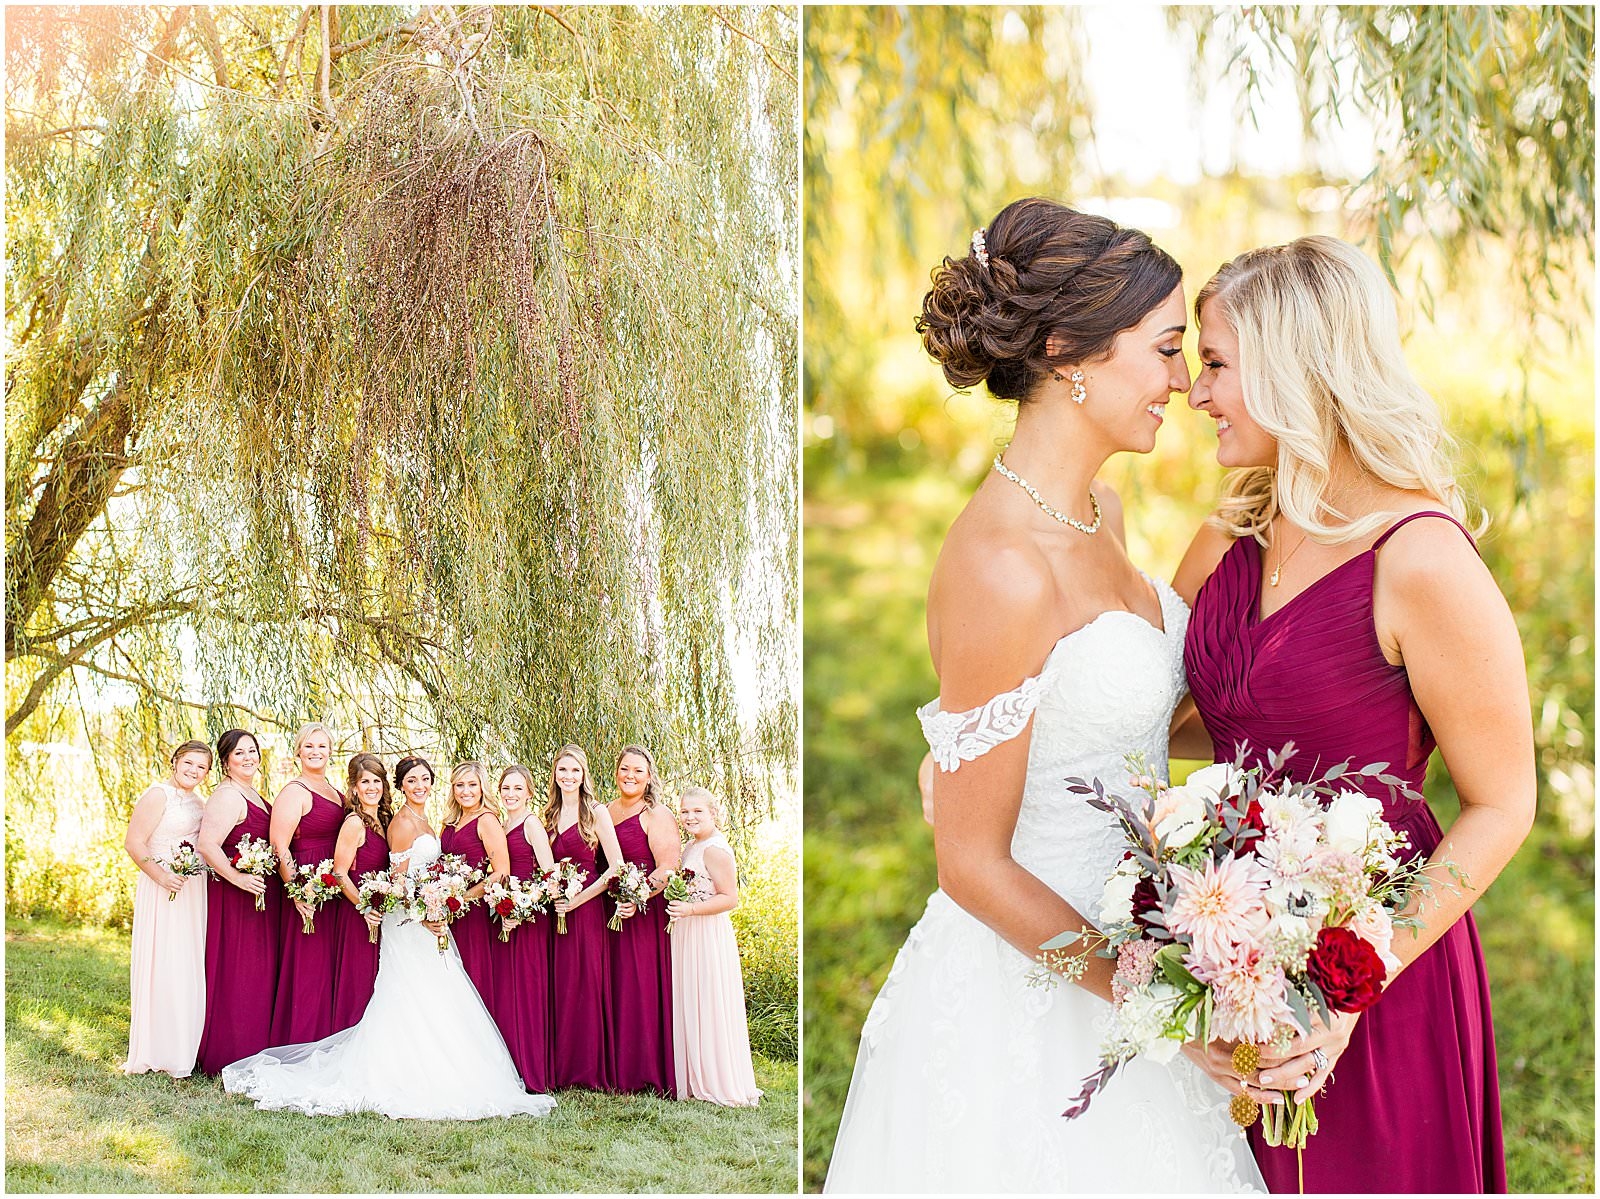 A Stunning Fall Wedding in Indianapolis, IN |. Sally and Andrew | Bret and Brandie Photography 0078.jpg